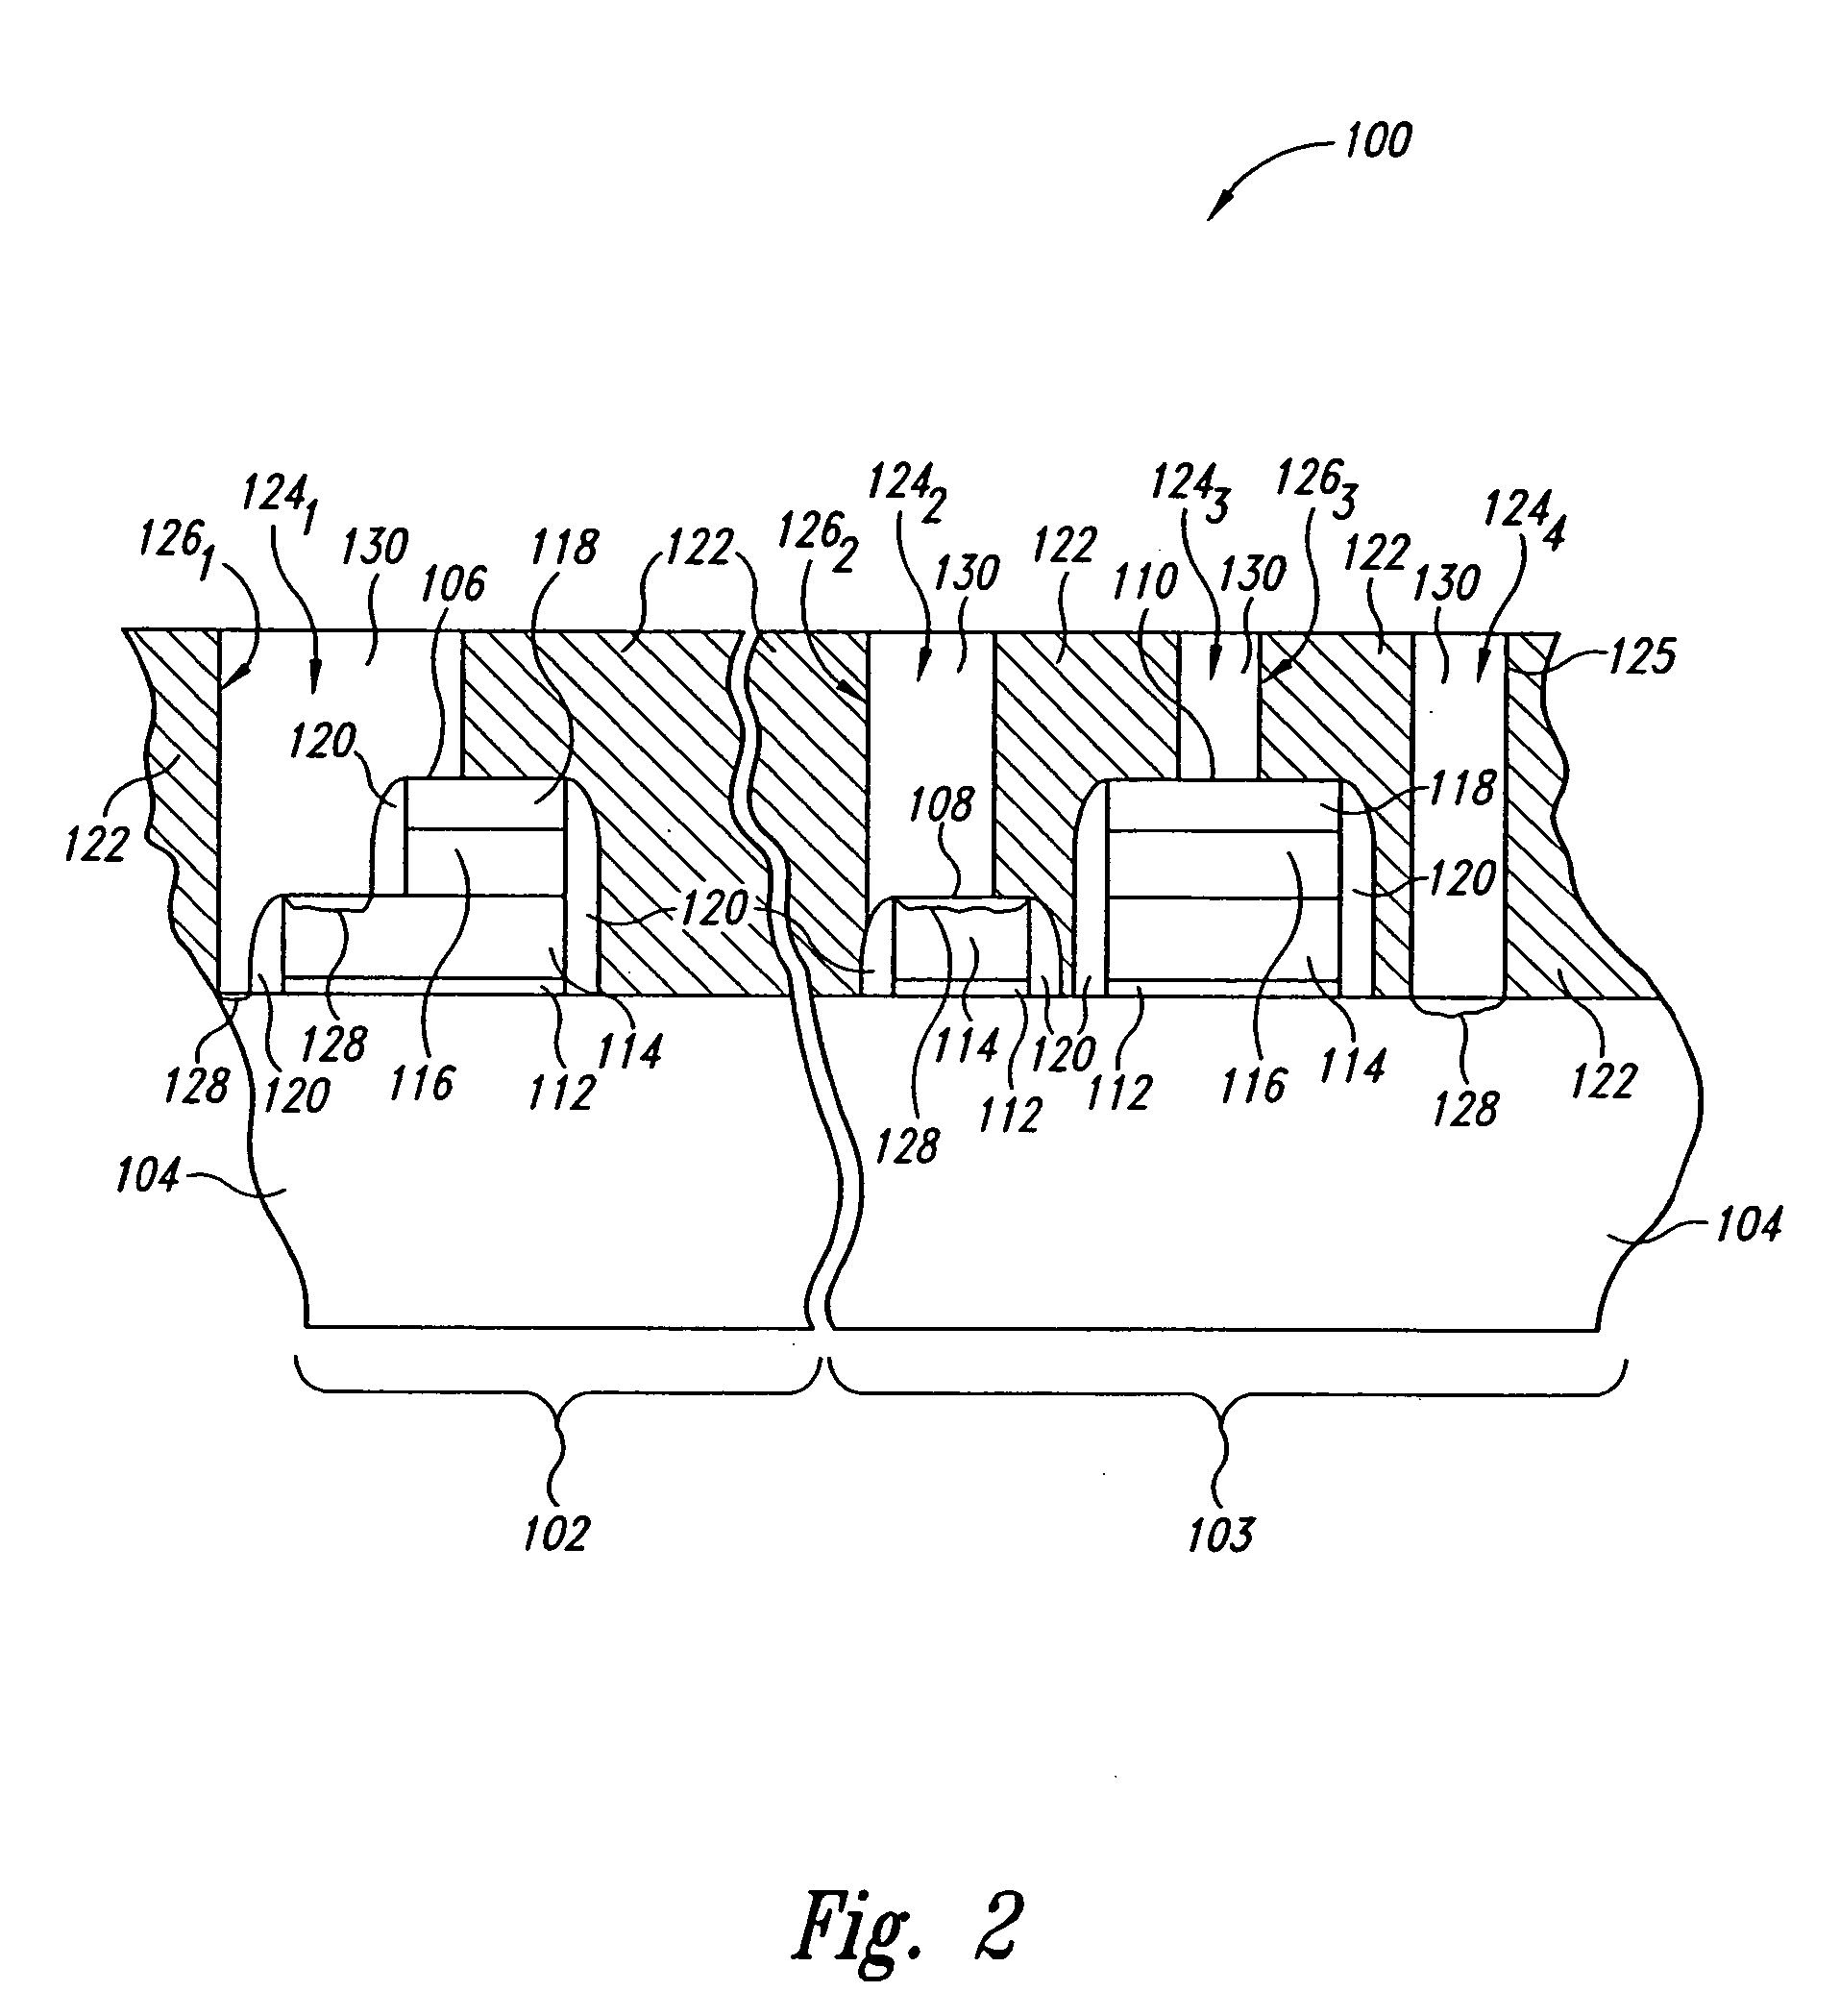 Methods for making semiconductor structures having high-speed areas and high-density areas